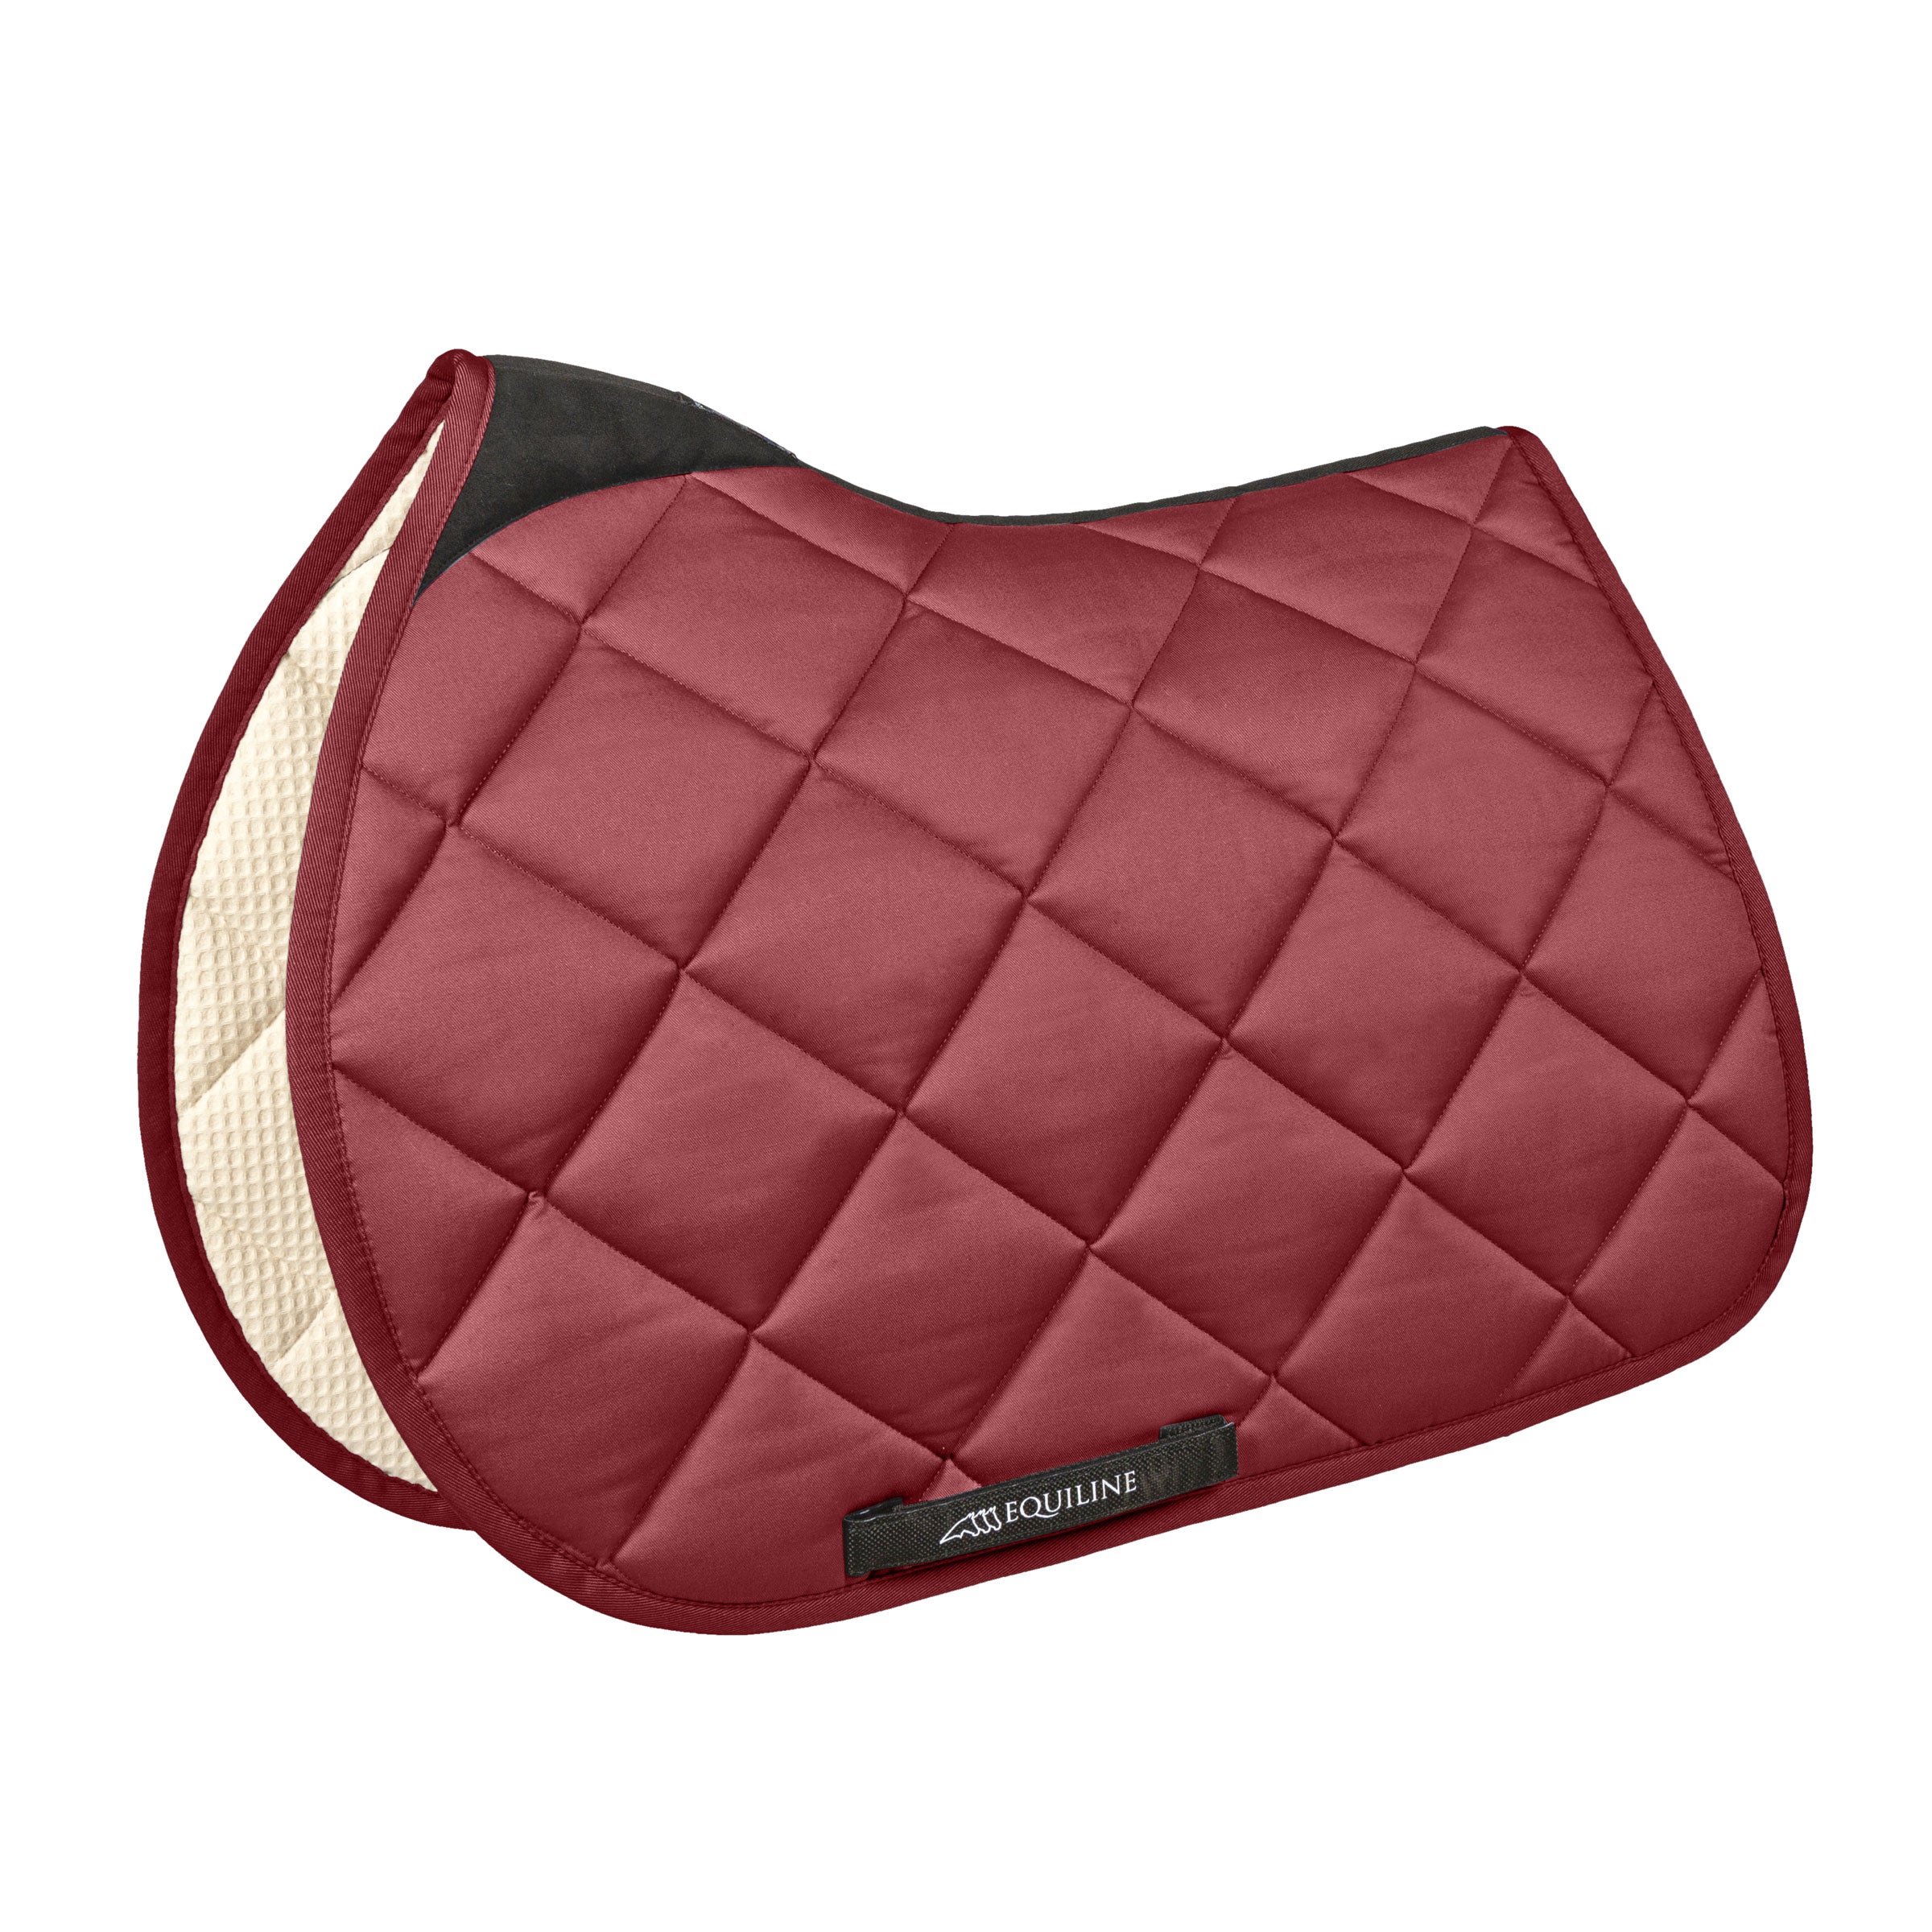 Equiline - Lauren Rombo Saddle Pad With Honeycomb